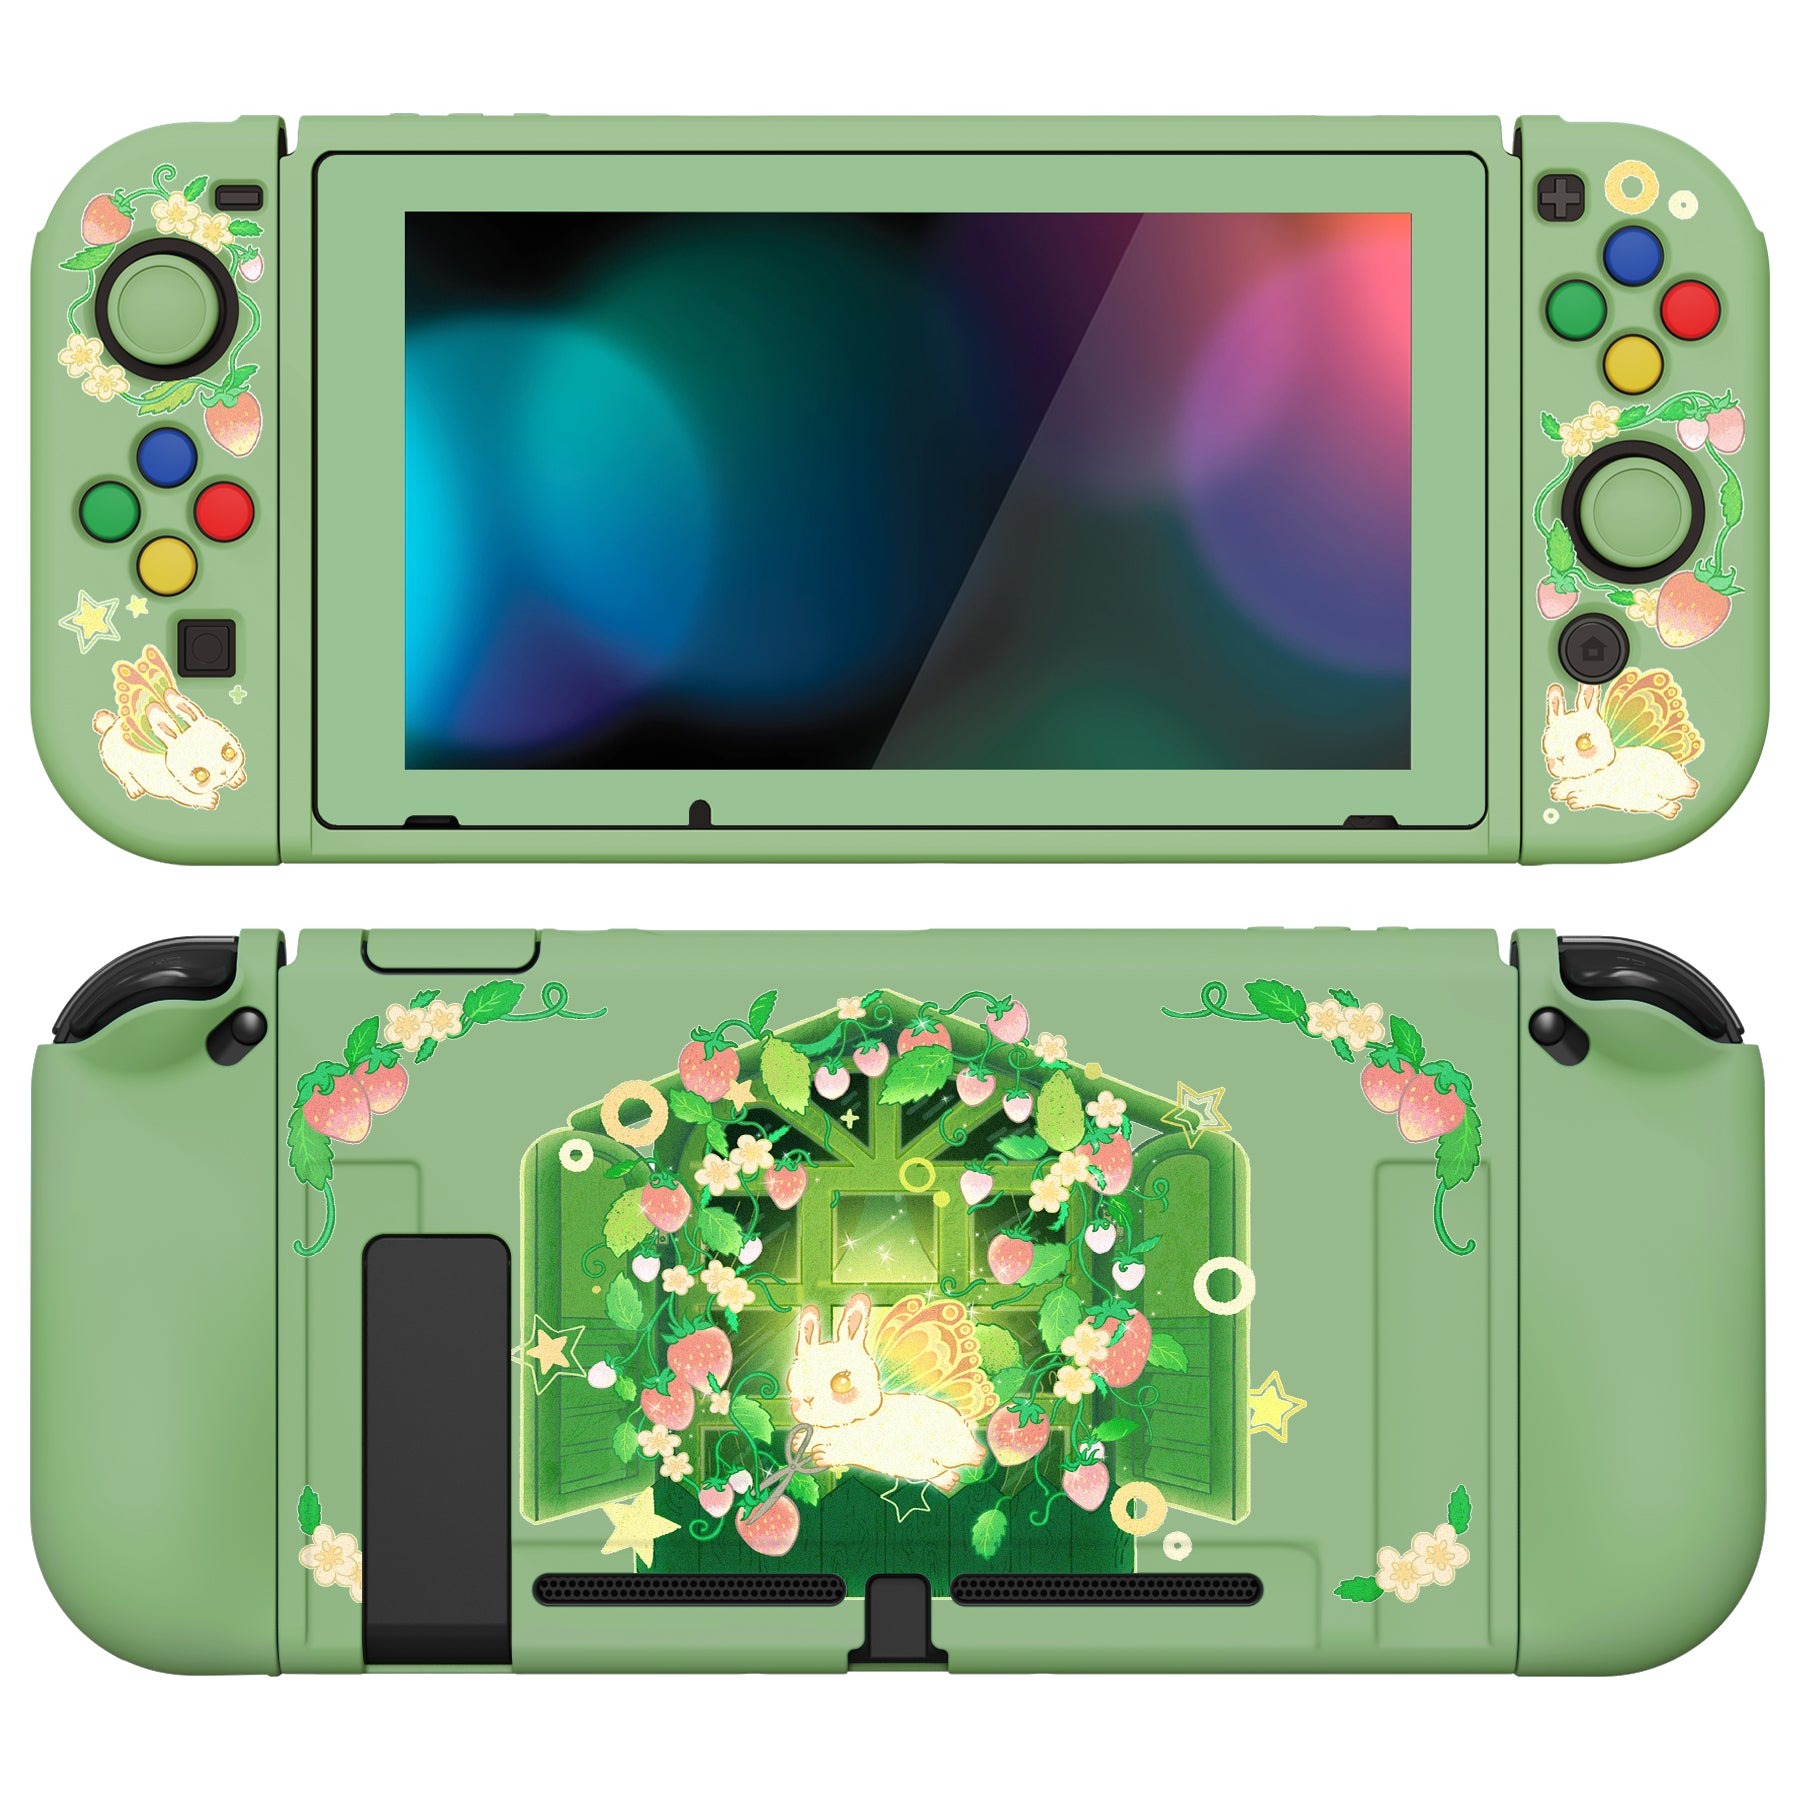 PlayVital ZealProtect Soft Protective Case for Nintendo Switch, Flexible Cover for Switch with Tempered Glass Screen Protector & Thumb Grips & ABXY Direction Button Caps - Strawberry Bunny - RNSYV6045 playvital